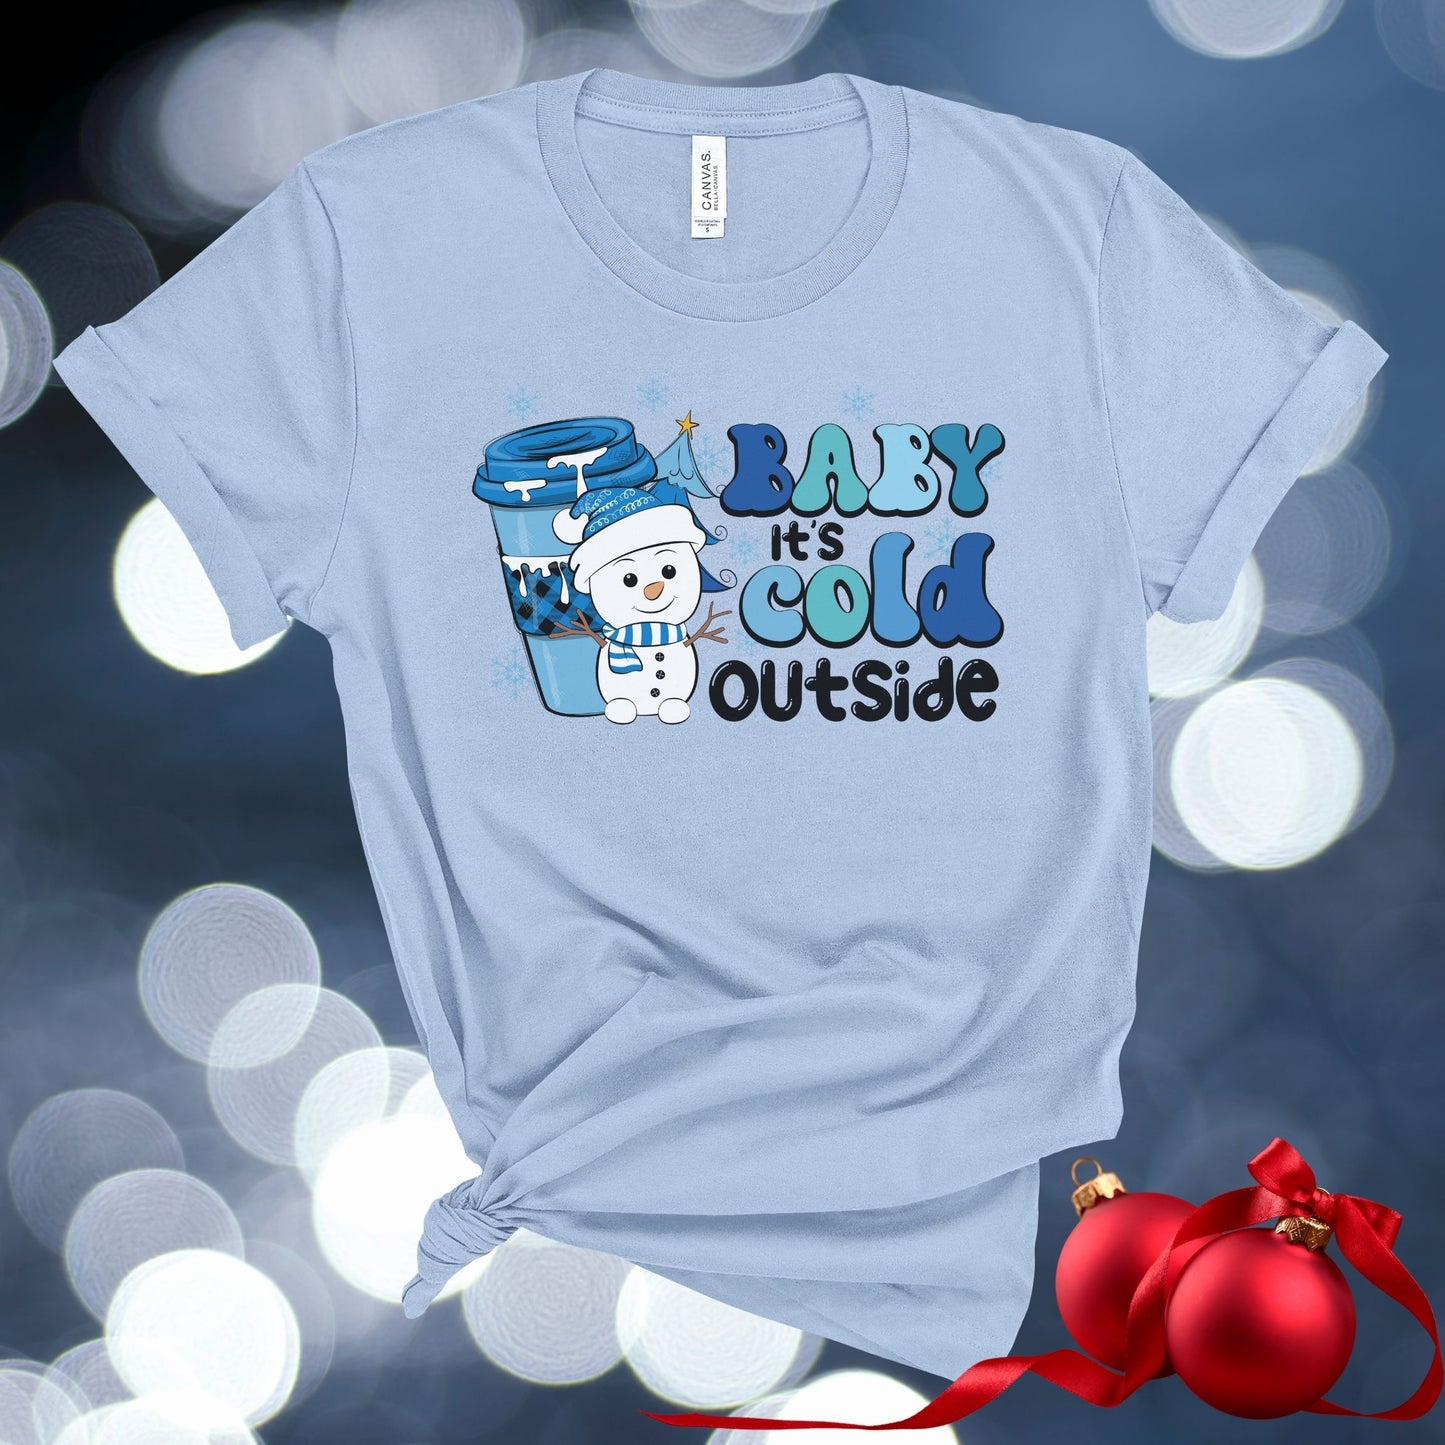 Blue  Tee with Baby It's Cold outside Graphic